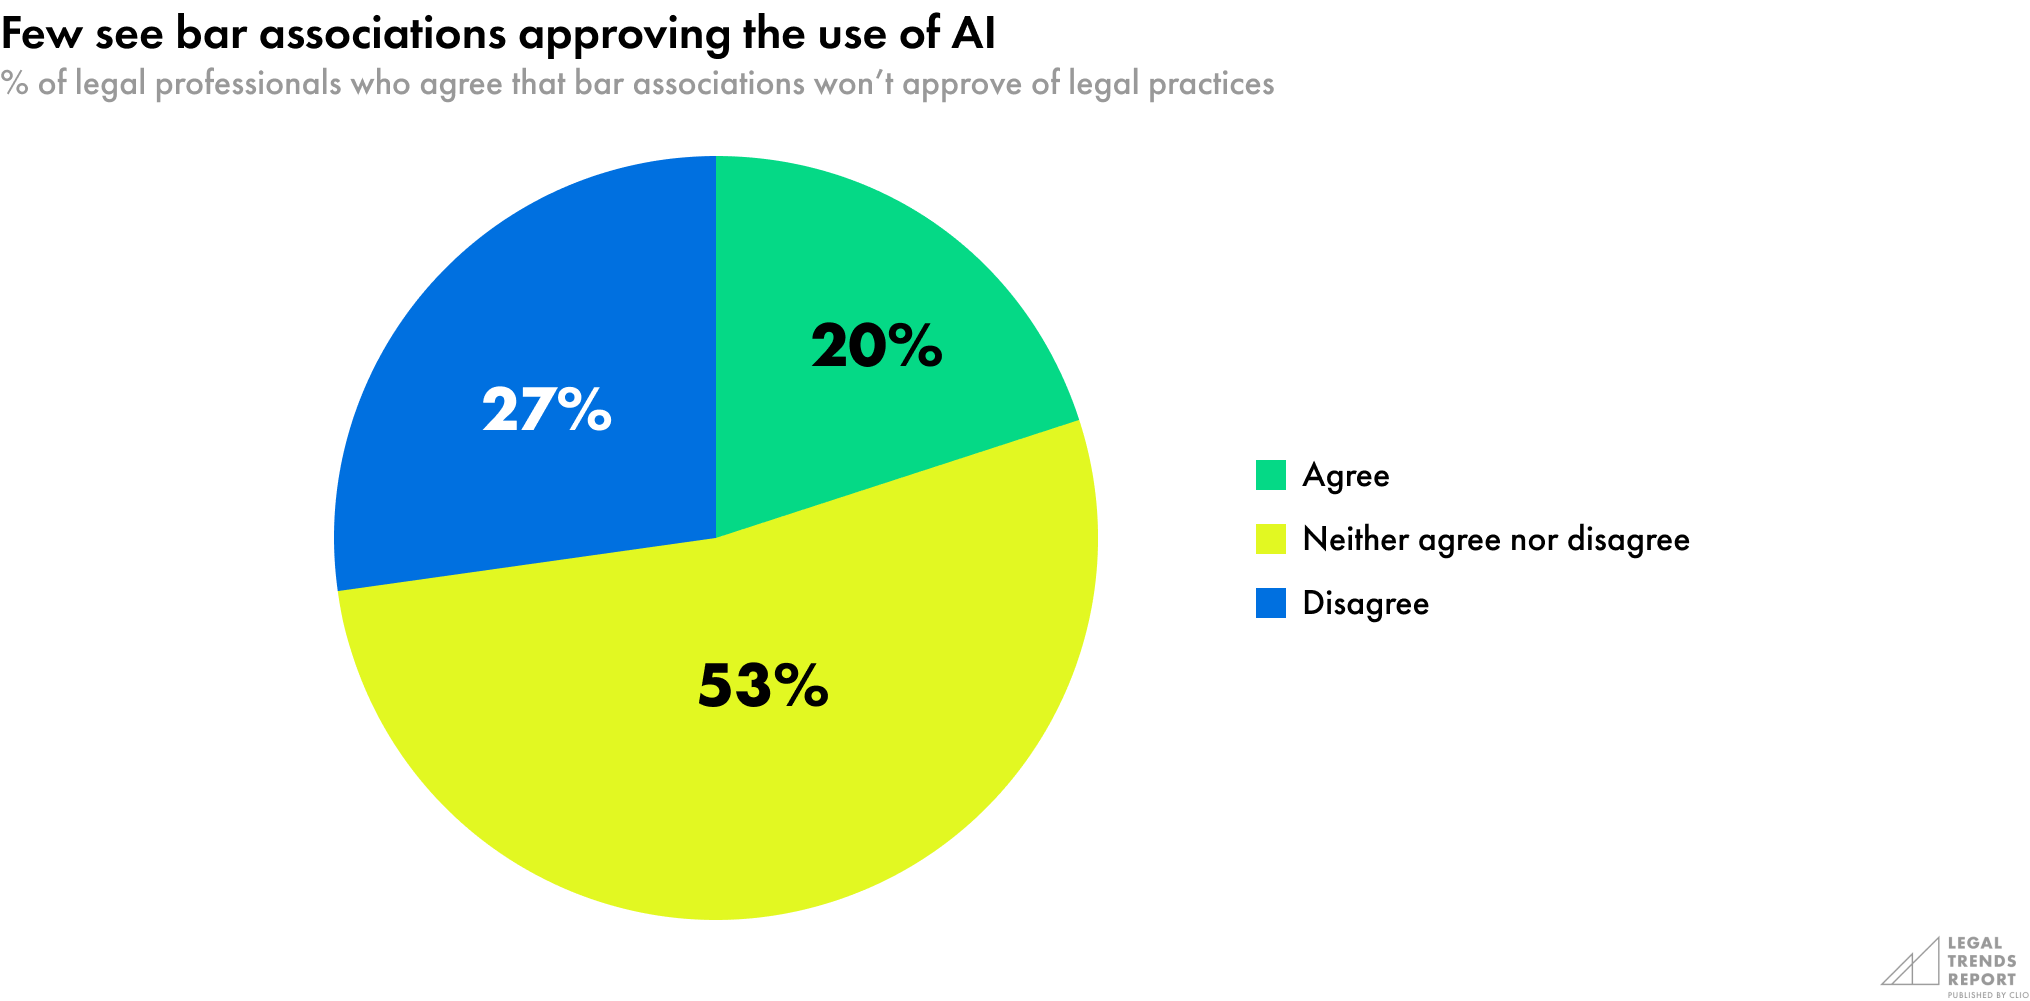 Few see bar associations approving the use of AI